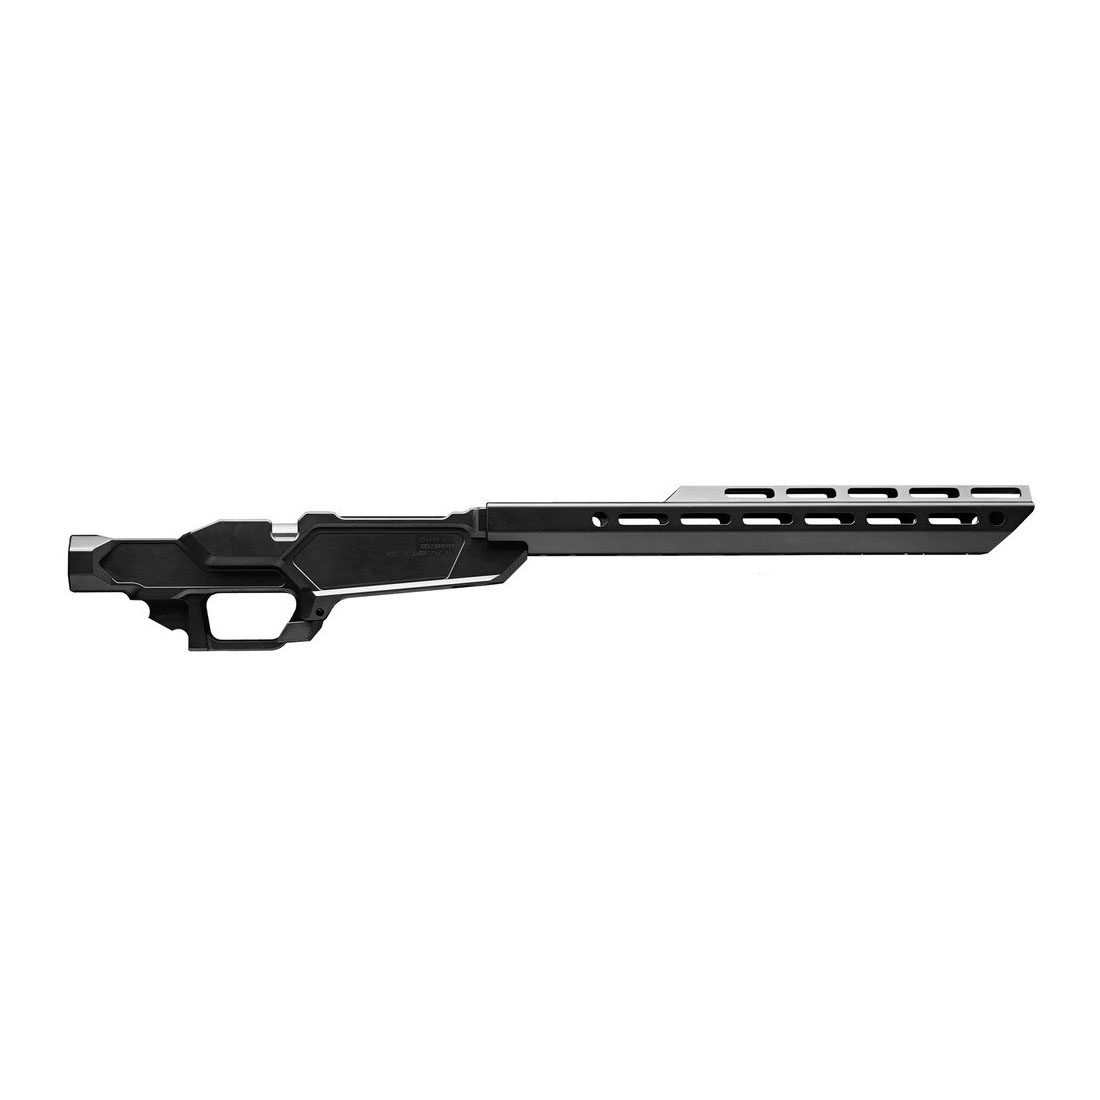 Looking for ruger american predator. Question is about larger diameter barrel compatability